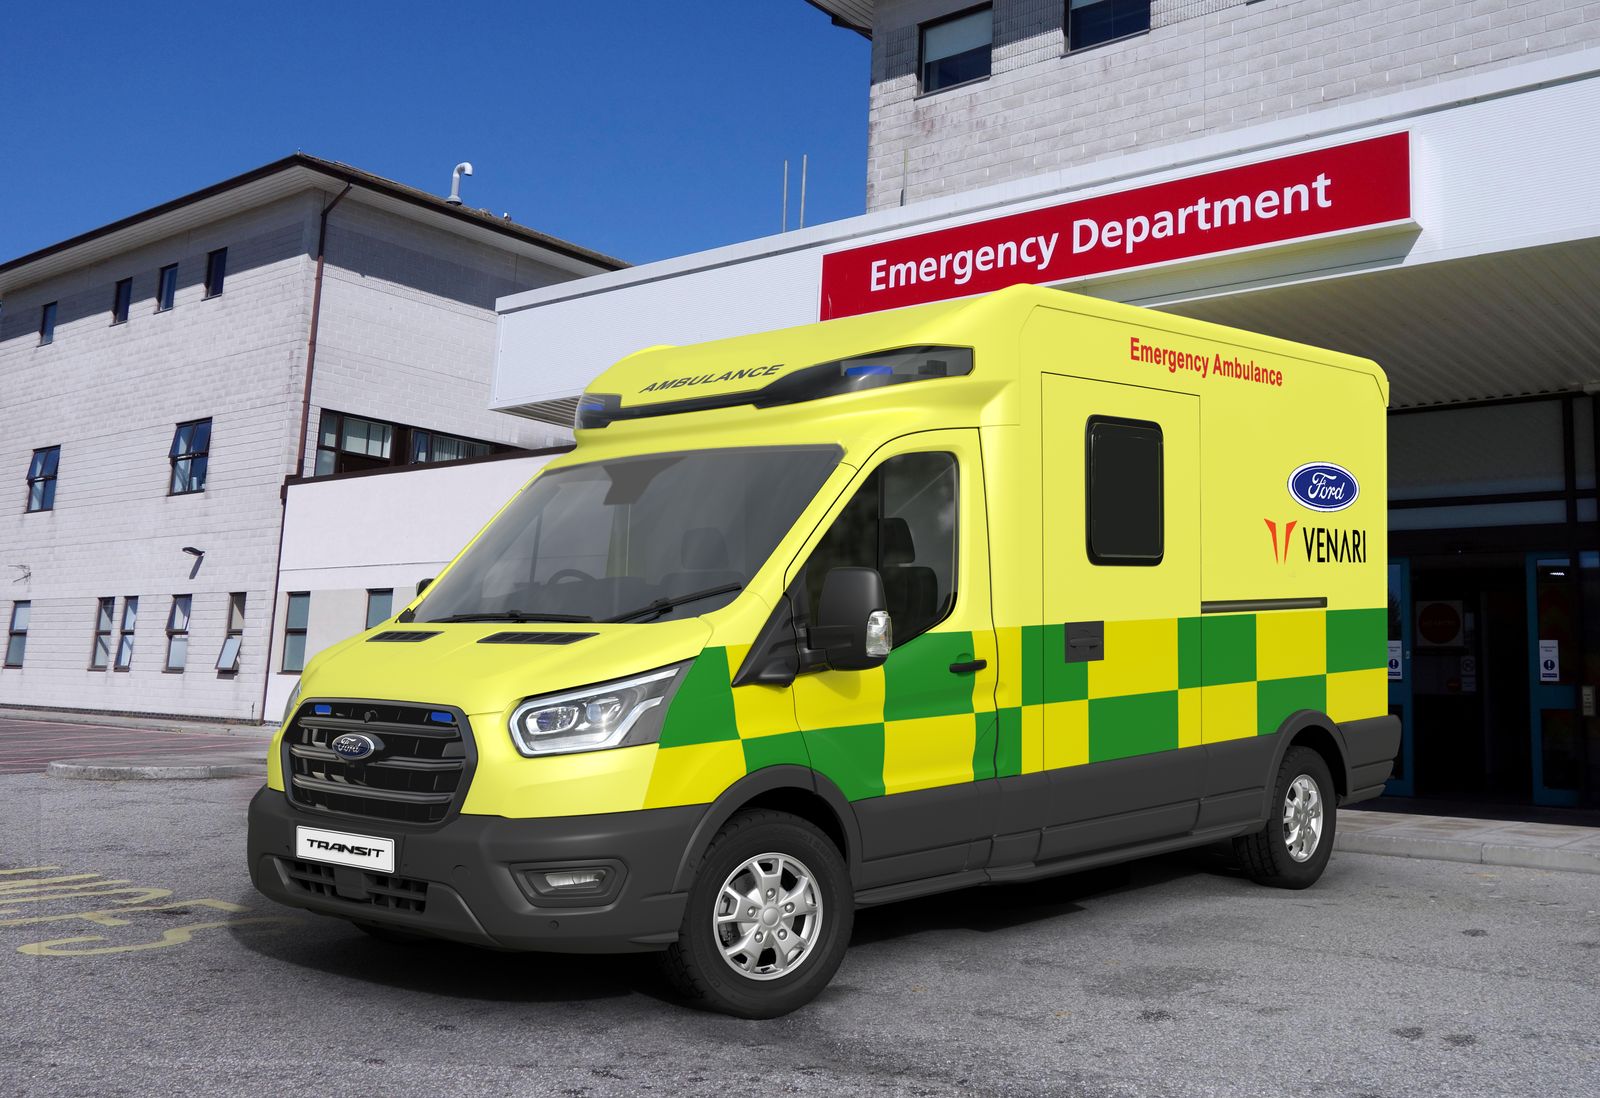 Ford and Venari Group to produce new lightweight ambulance in UK